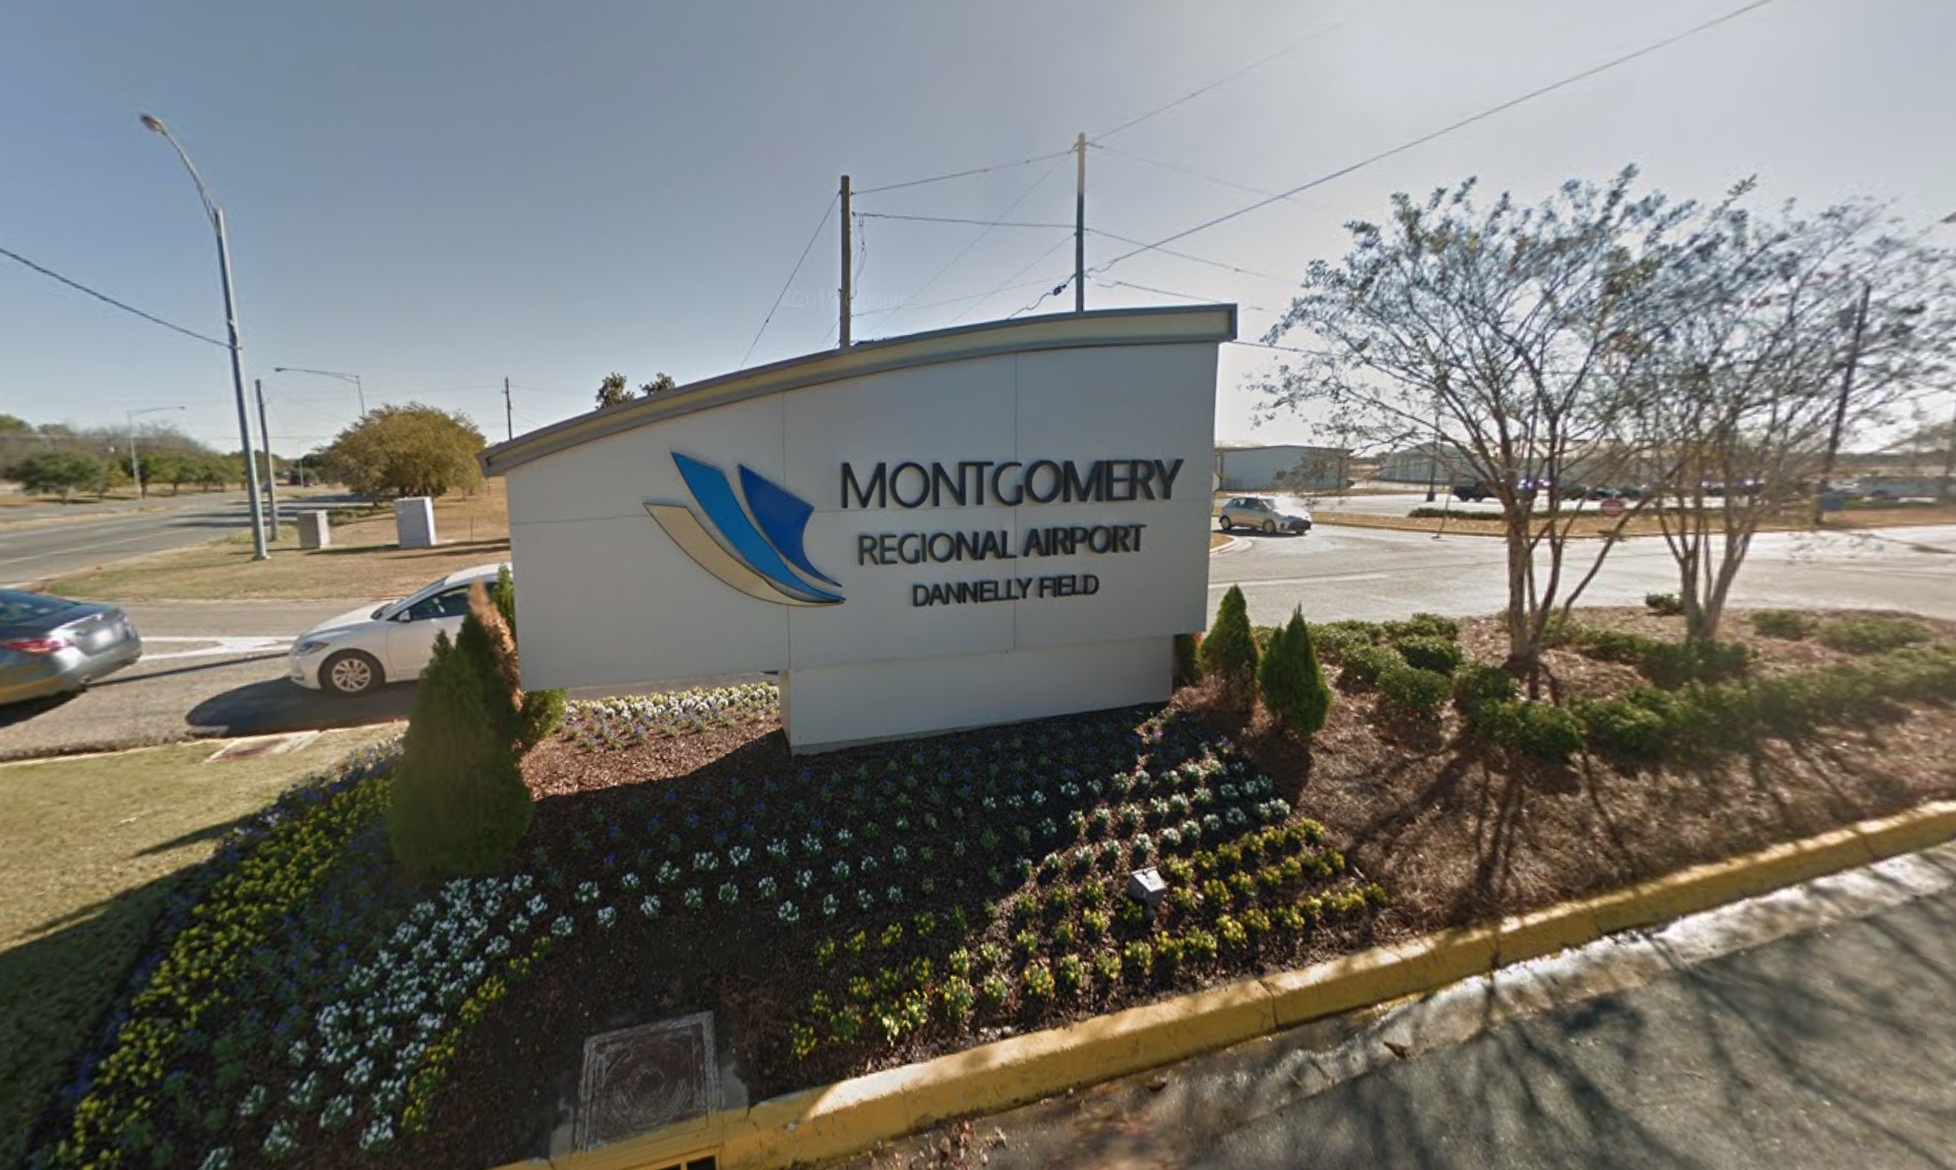 PHOTO: Montgomery Regional Airport (Dannelly Field) is the home of the Alabama Air National Guard's 187th Fighter Wing.